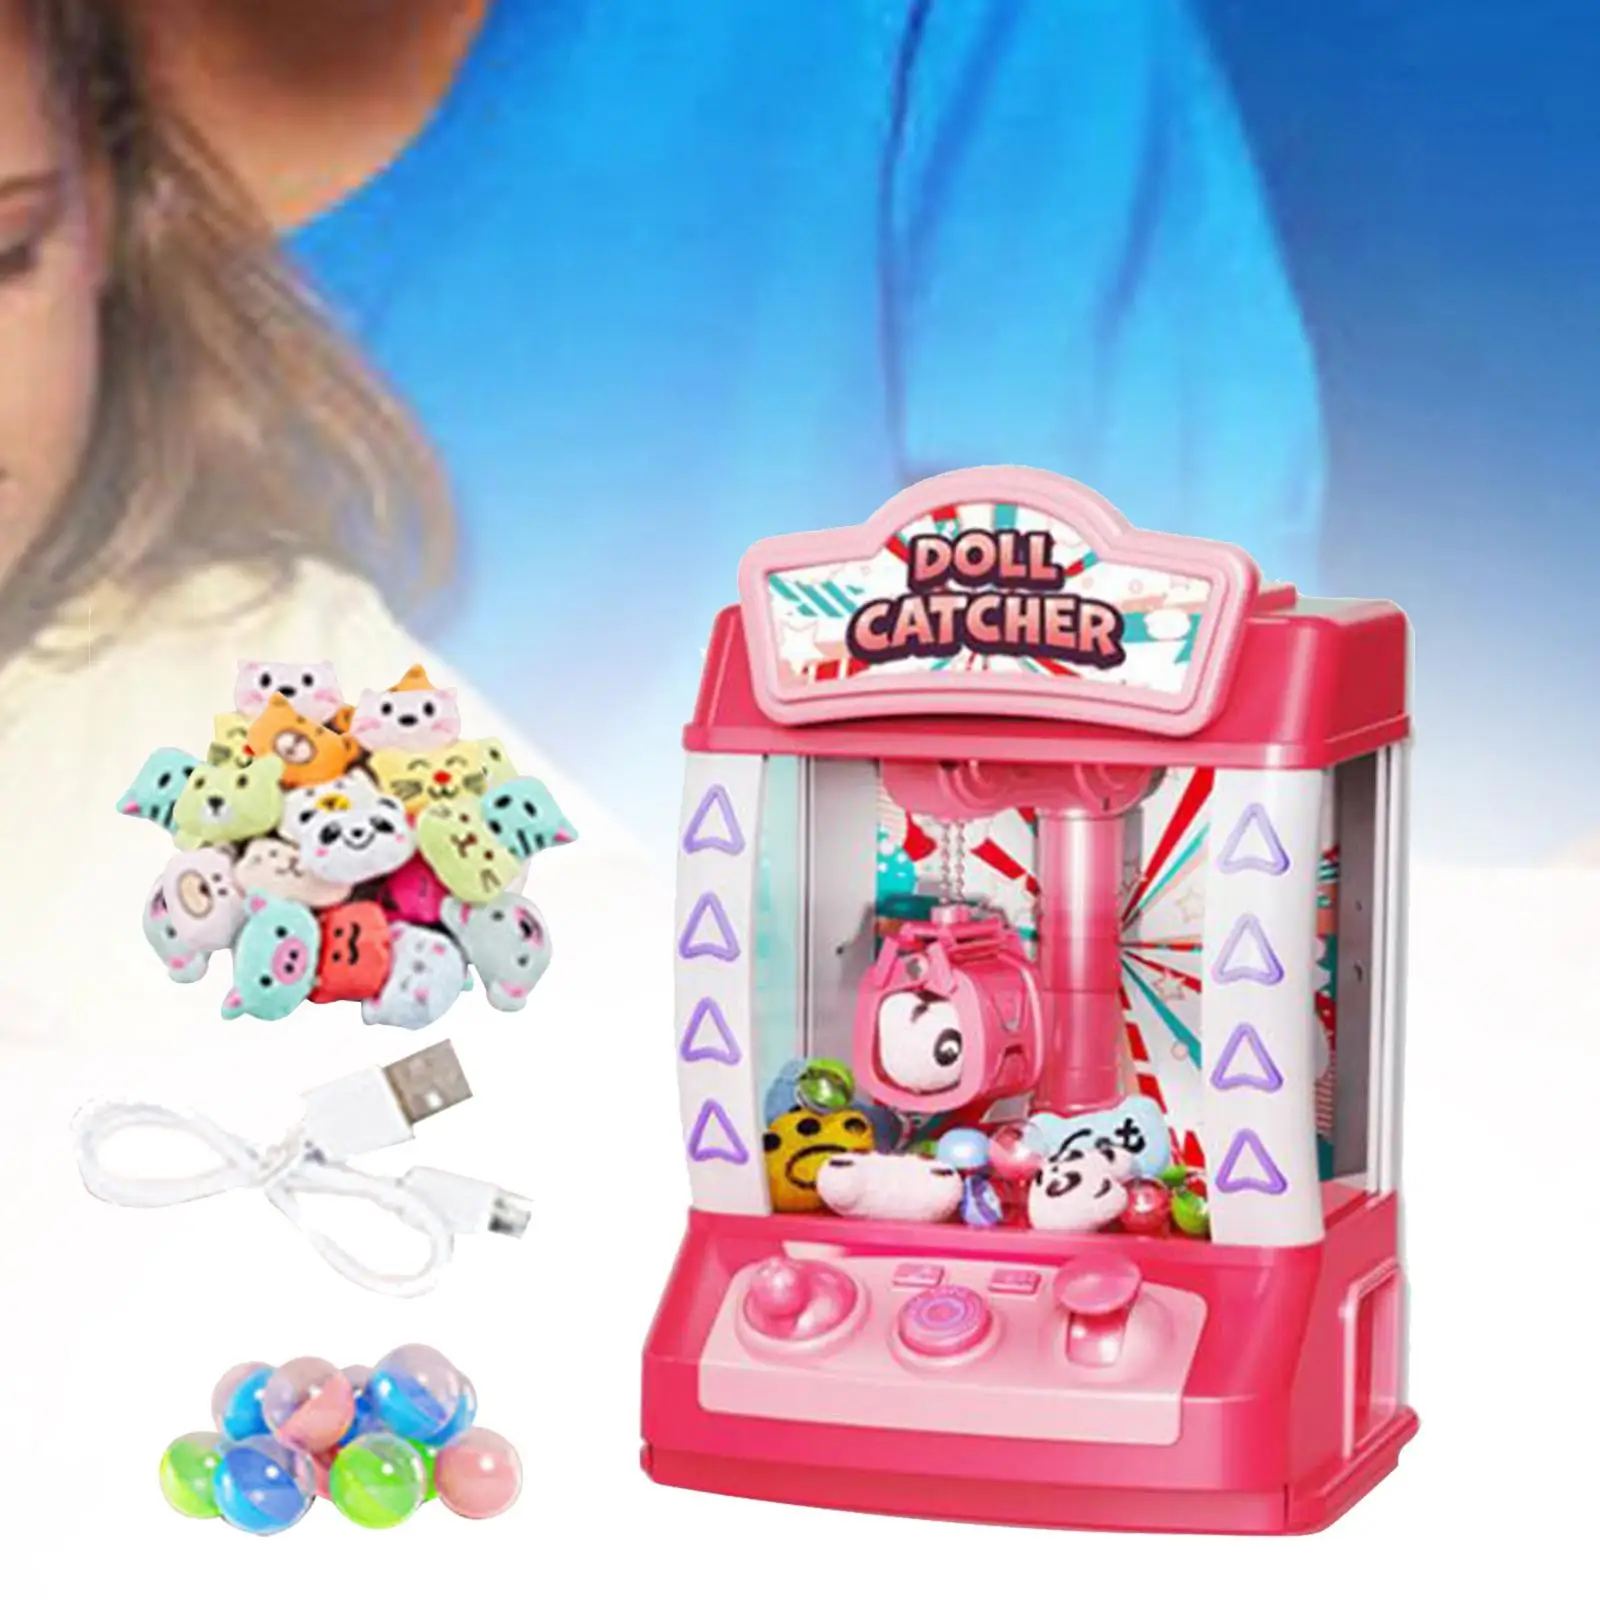 Claw Machine Arcade Game Arcade Candy Capsule Claw Game Prizes Toy Mini Vending Machine for Kids Adults Toddlers Home Girls Boys